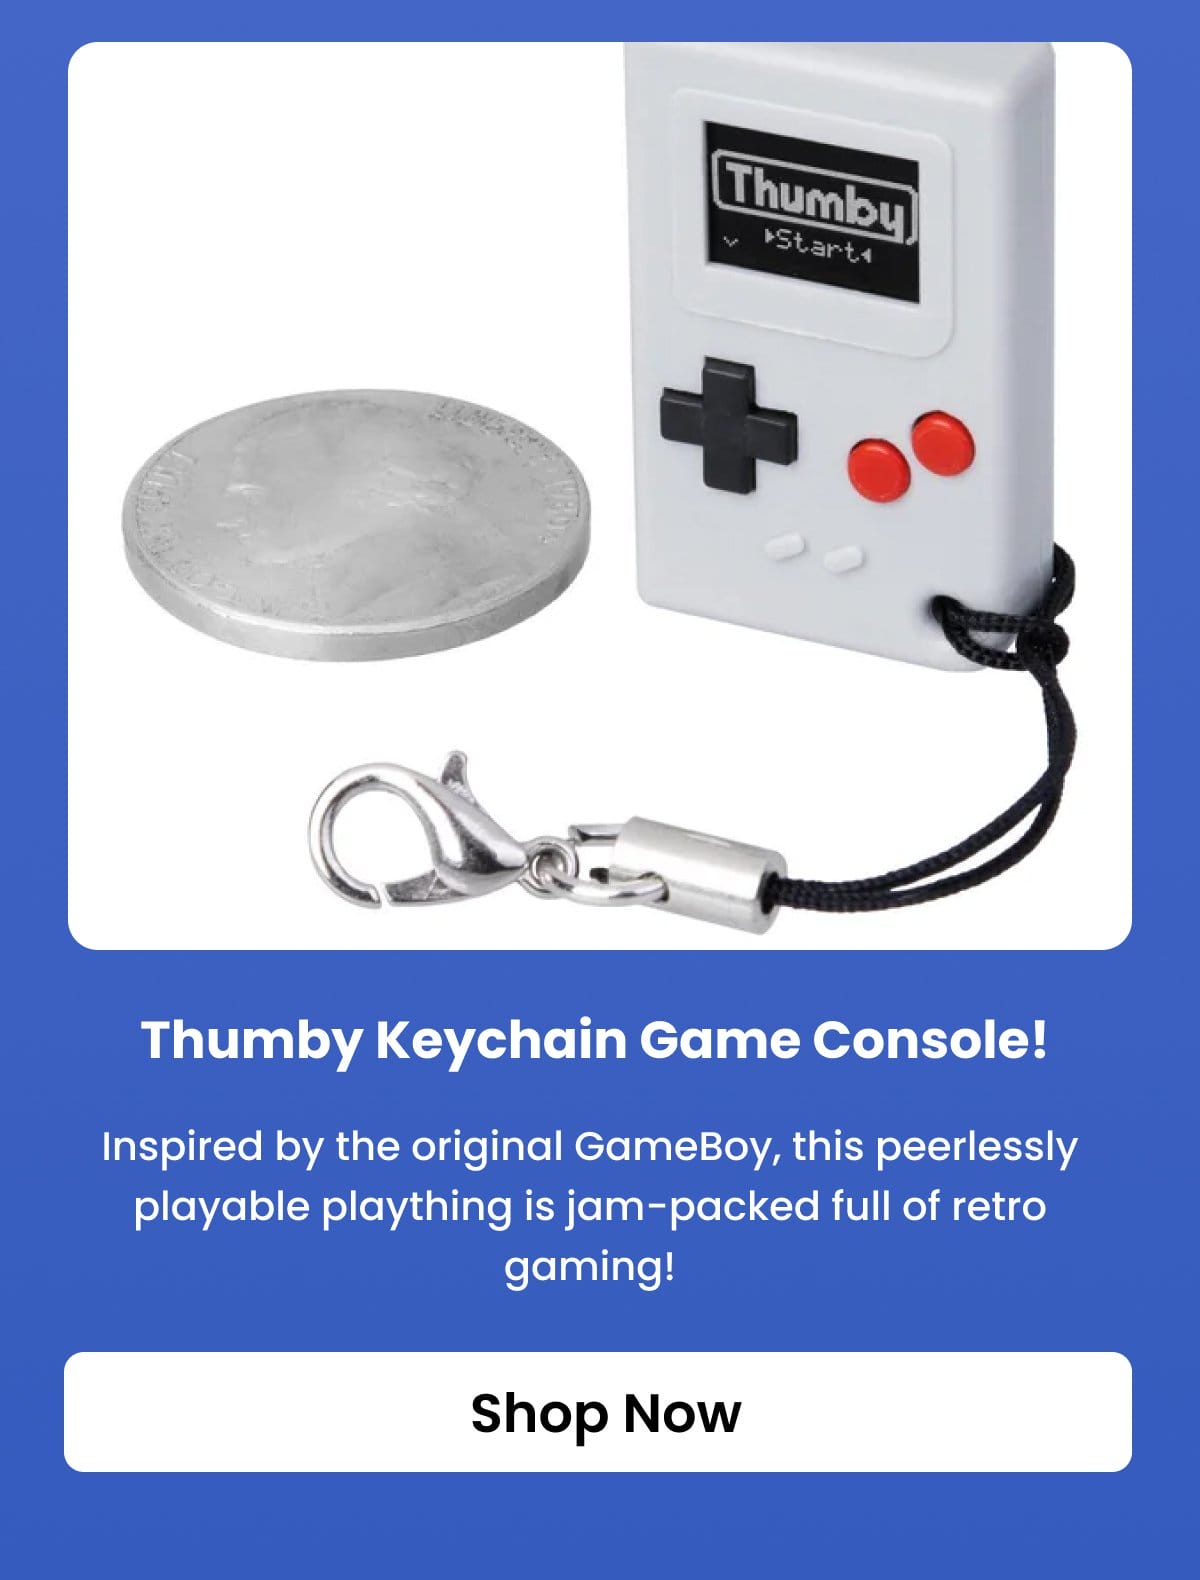 Thumby Keychain Game Console